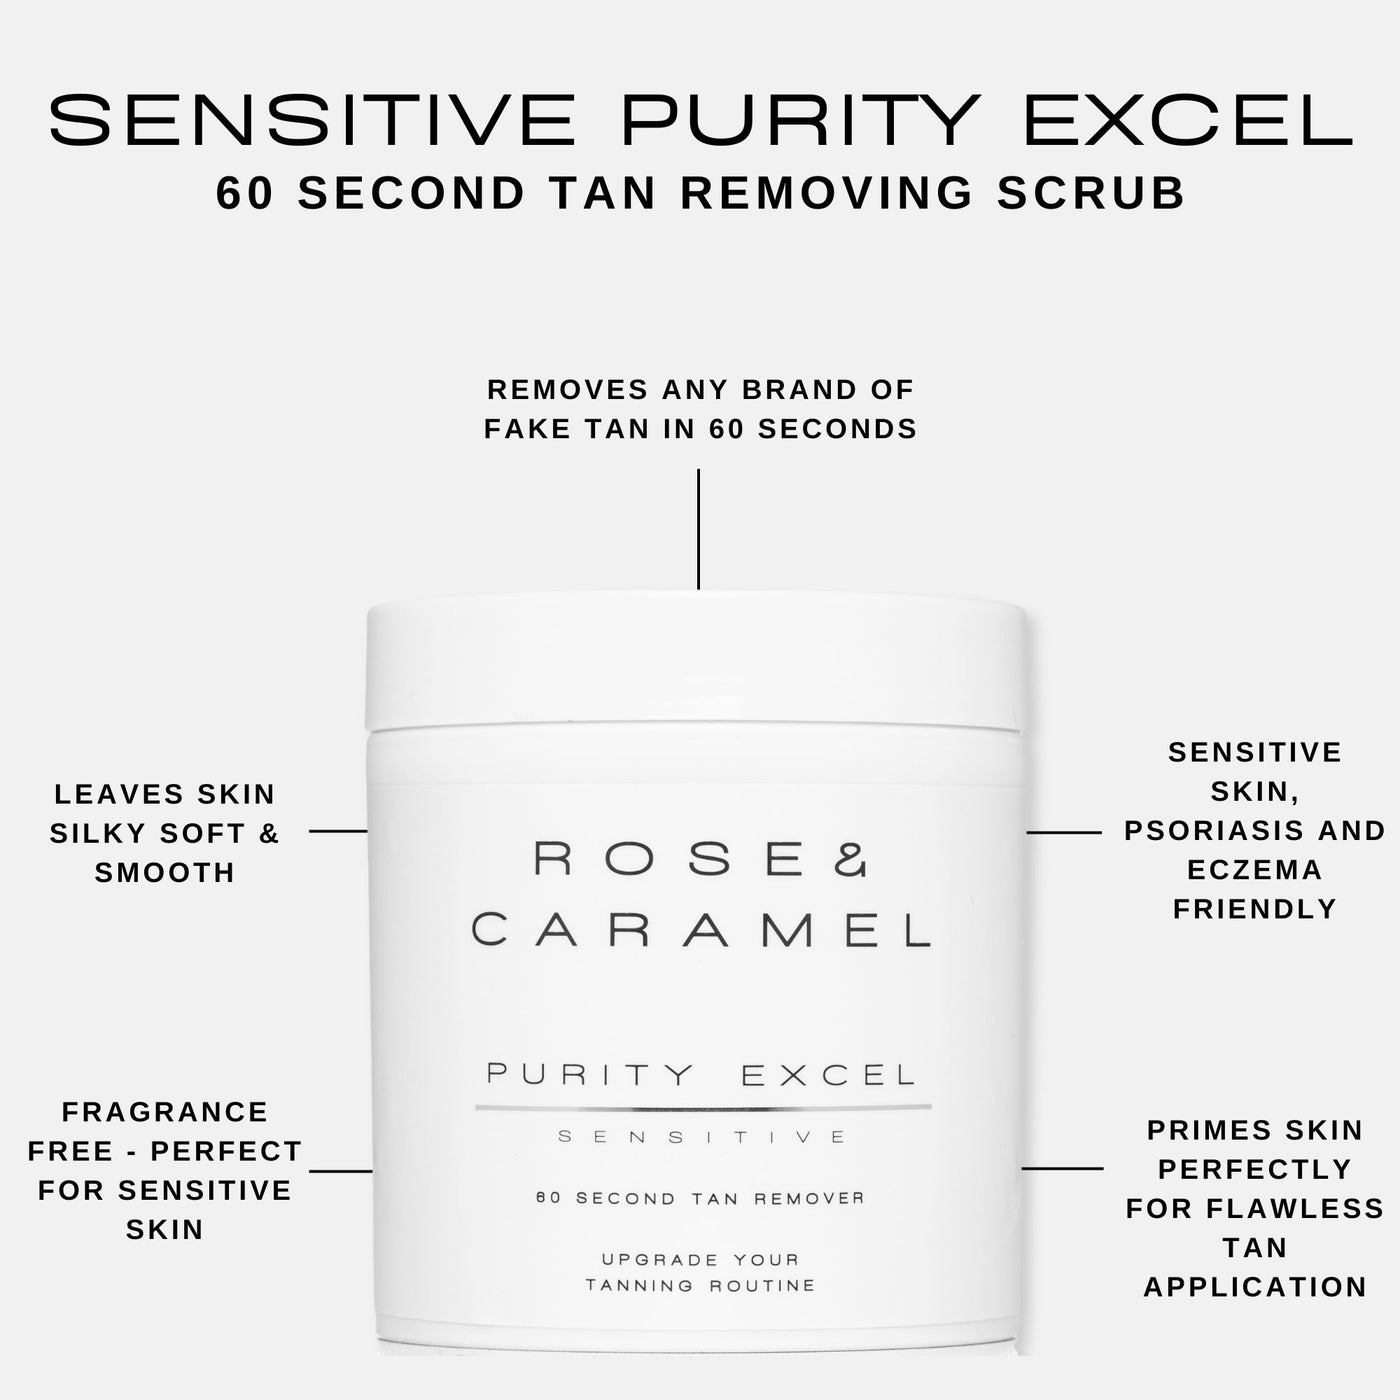 Box Of Sensitive Edition- Purity Excel 60 Second Tan Remover (440ml)